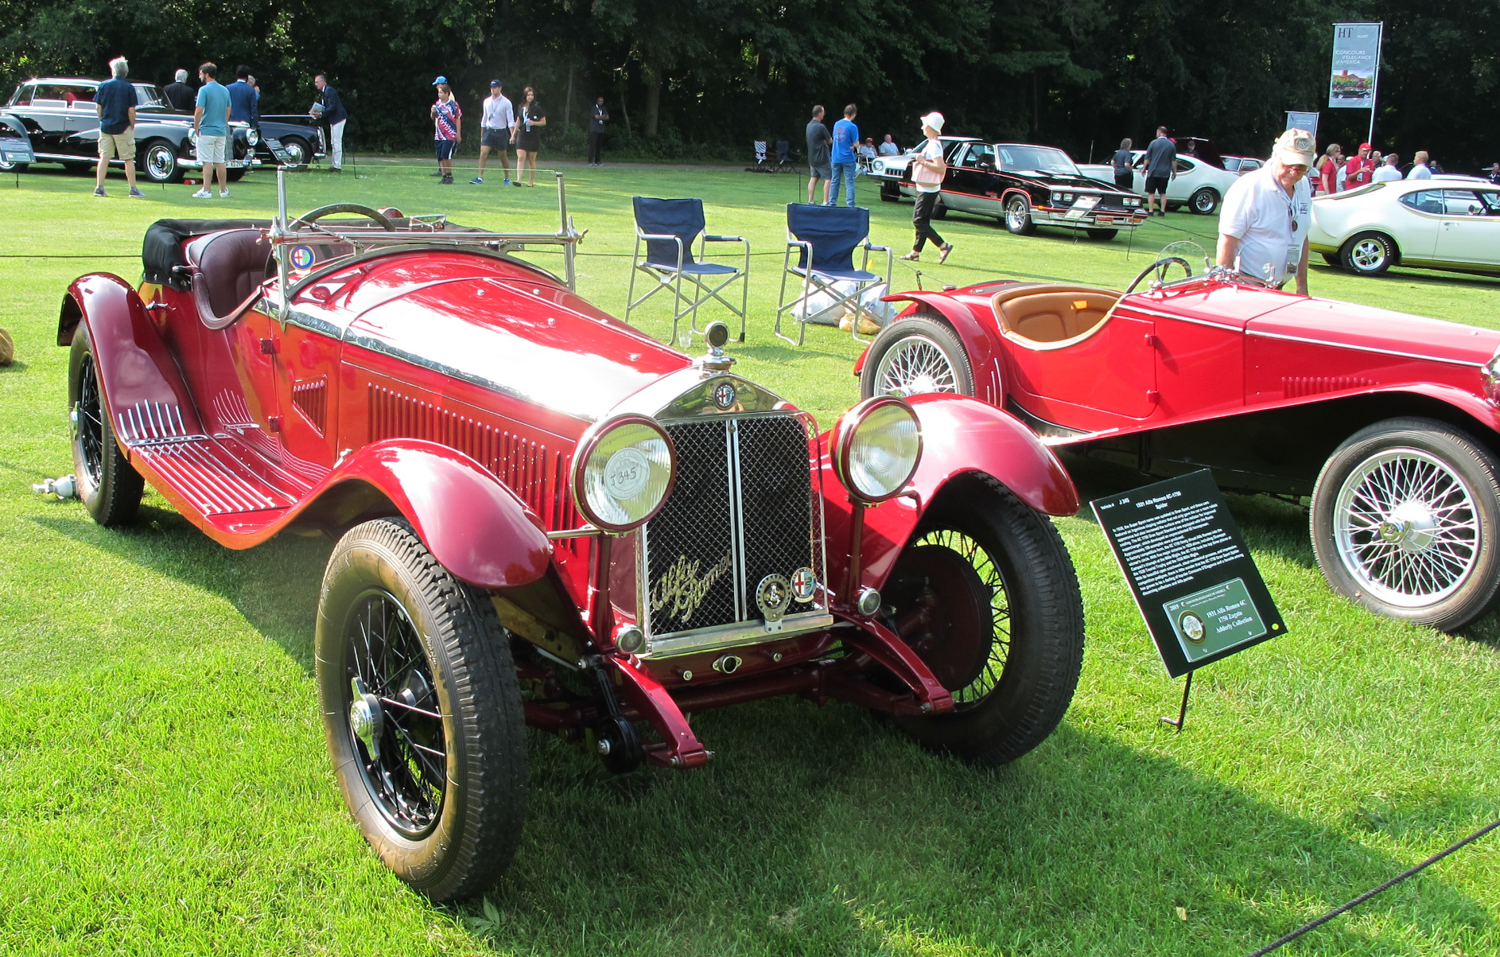 1931 Alfa-Romeo 6C-1750 Spider of the Adderly Collection.